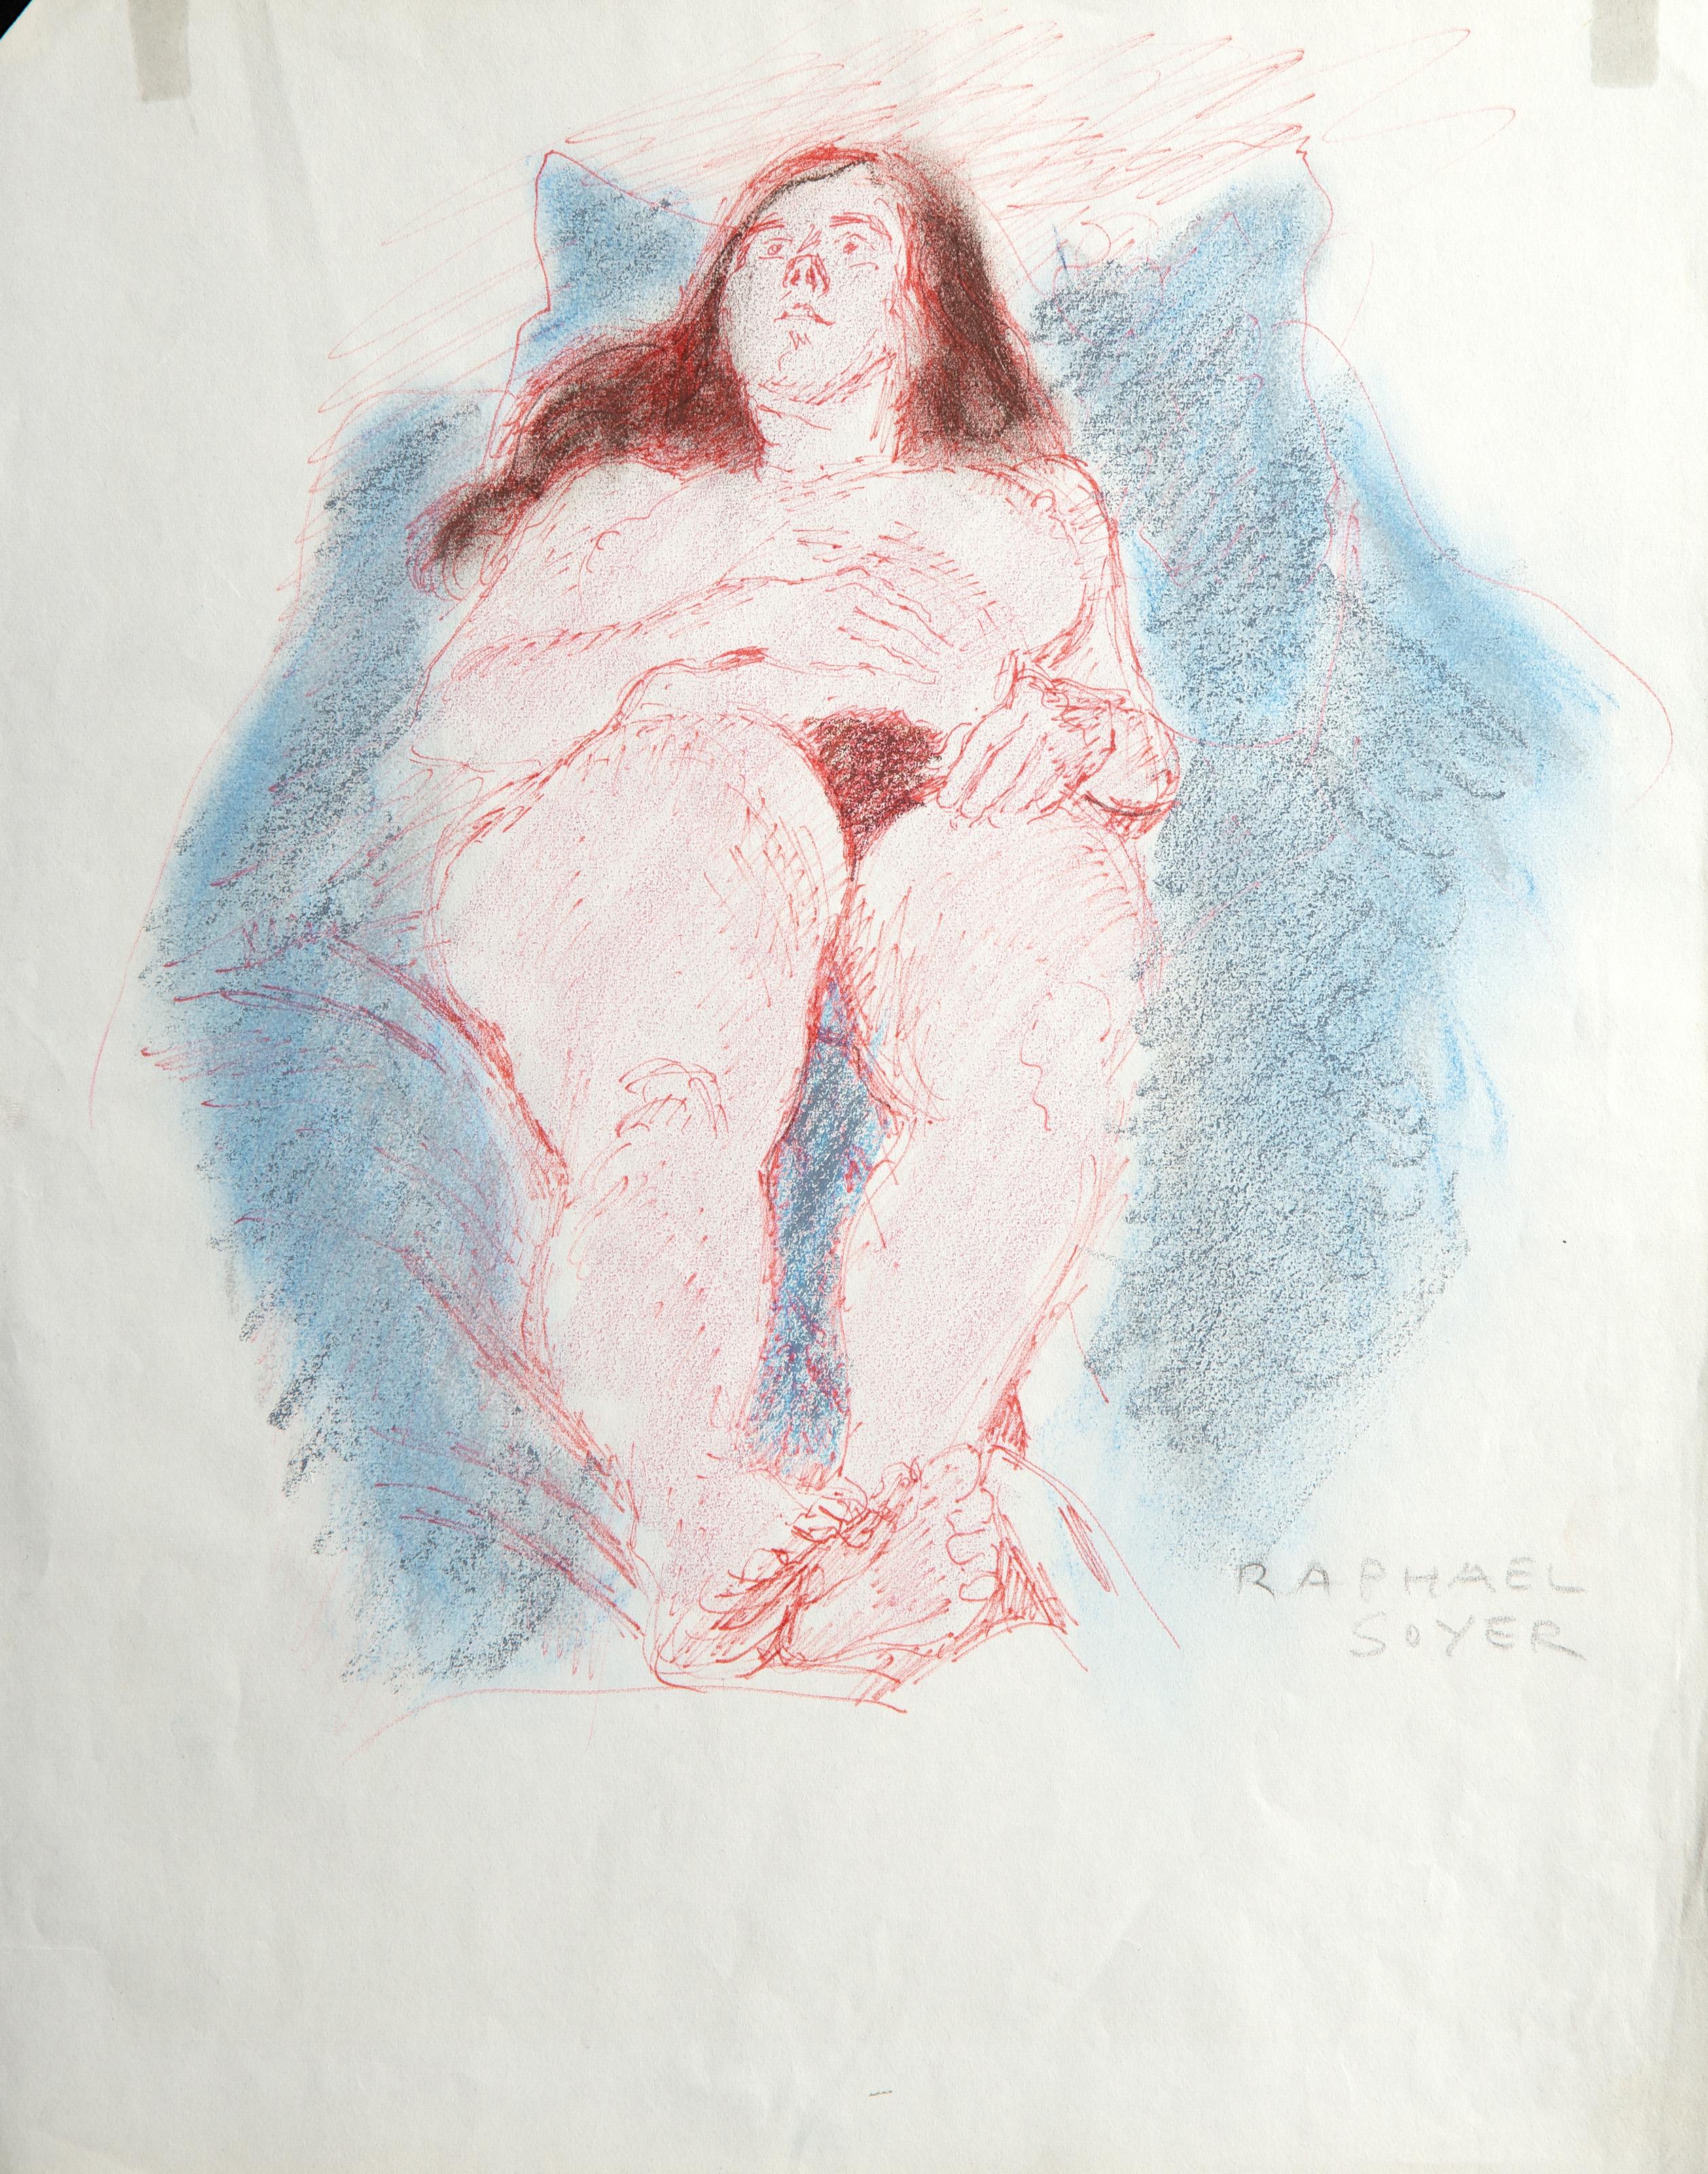 Raphael Soyer, Russian/American (1899 - 1987) -  Reclining Nude in Blue. Medium: Ink and Pastel on Paper, signed in pencil lower right, Size: 12.5 x 10.25 in. (31.75 x 26.04 cm) 